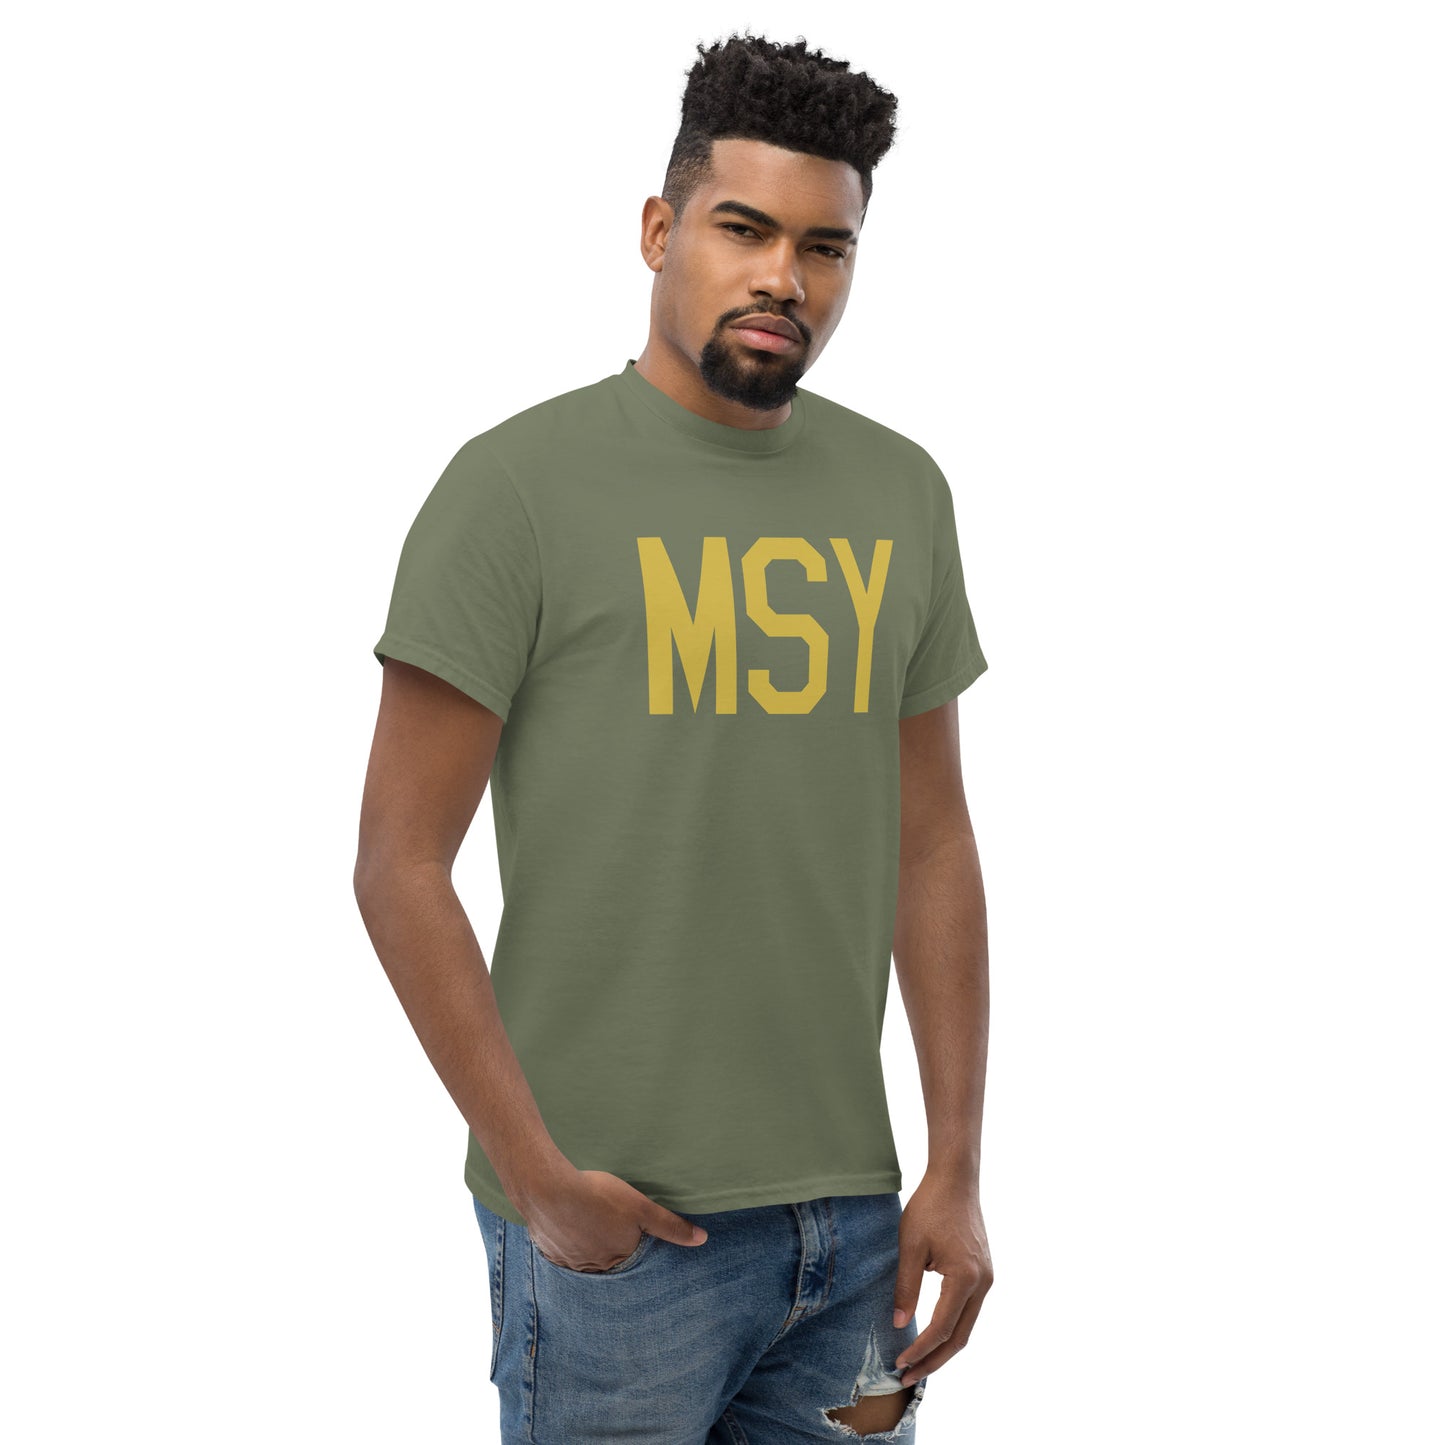 Aviation Enthusiast Men's Tee - Old Gold Graphic • MSY New Orleans • YHM Designs - Image 08